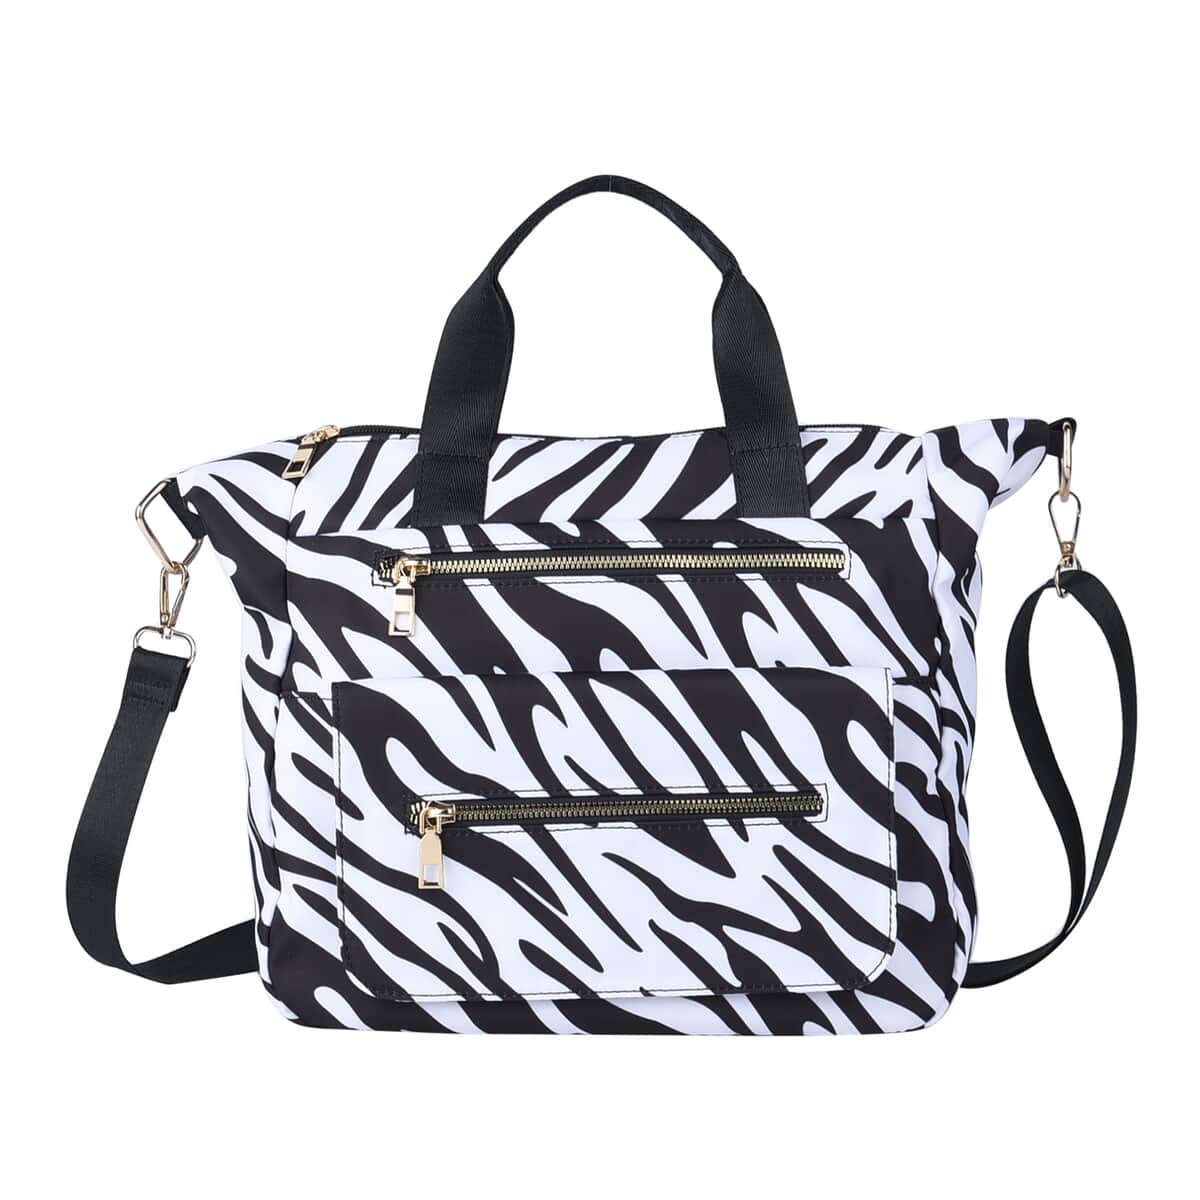 Black Color White Zebra Pattern Nylon Convertible Bag (12"x4"x11.5") with Handle and Shoulder Strap image number 0